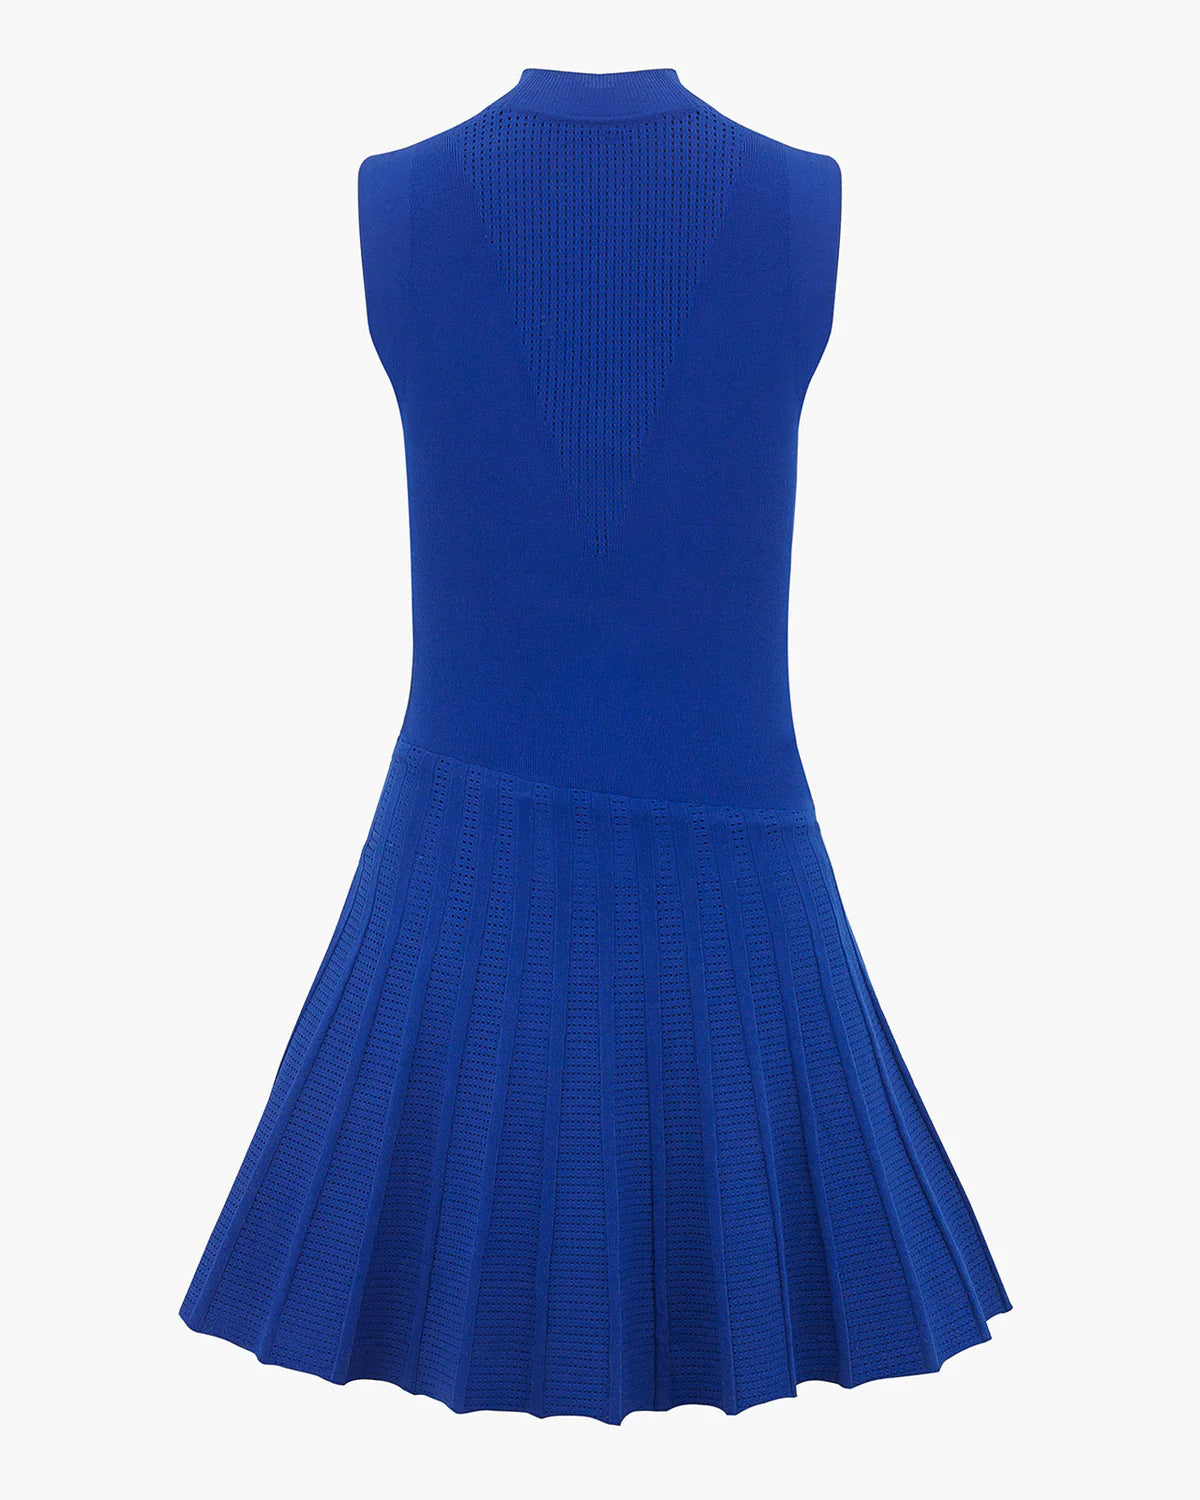 FAIRLIAR 23SS PUNCHED SLEEVELESS KNIT DRESS